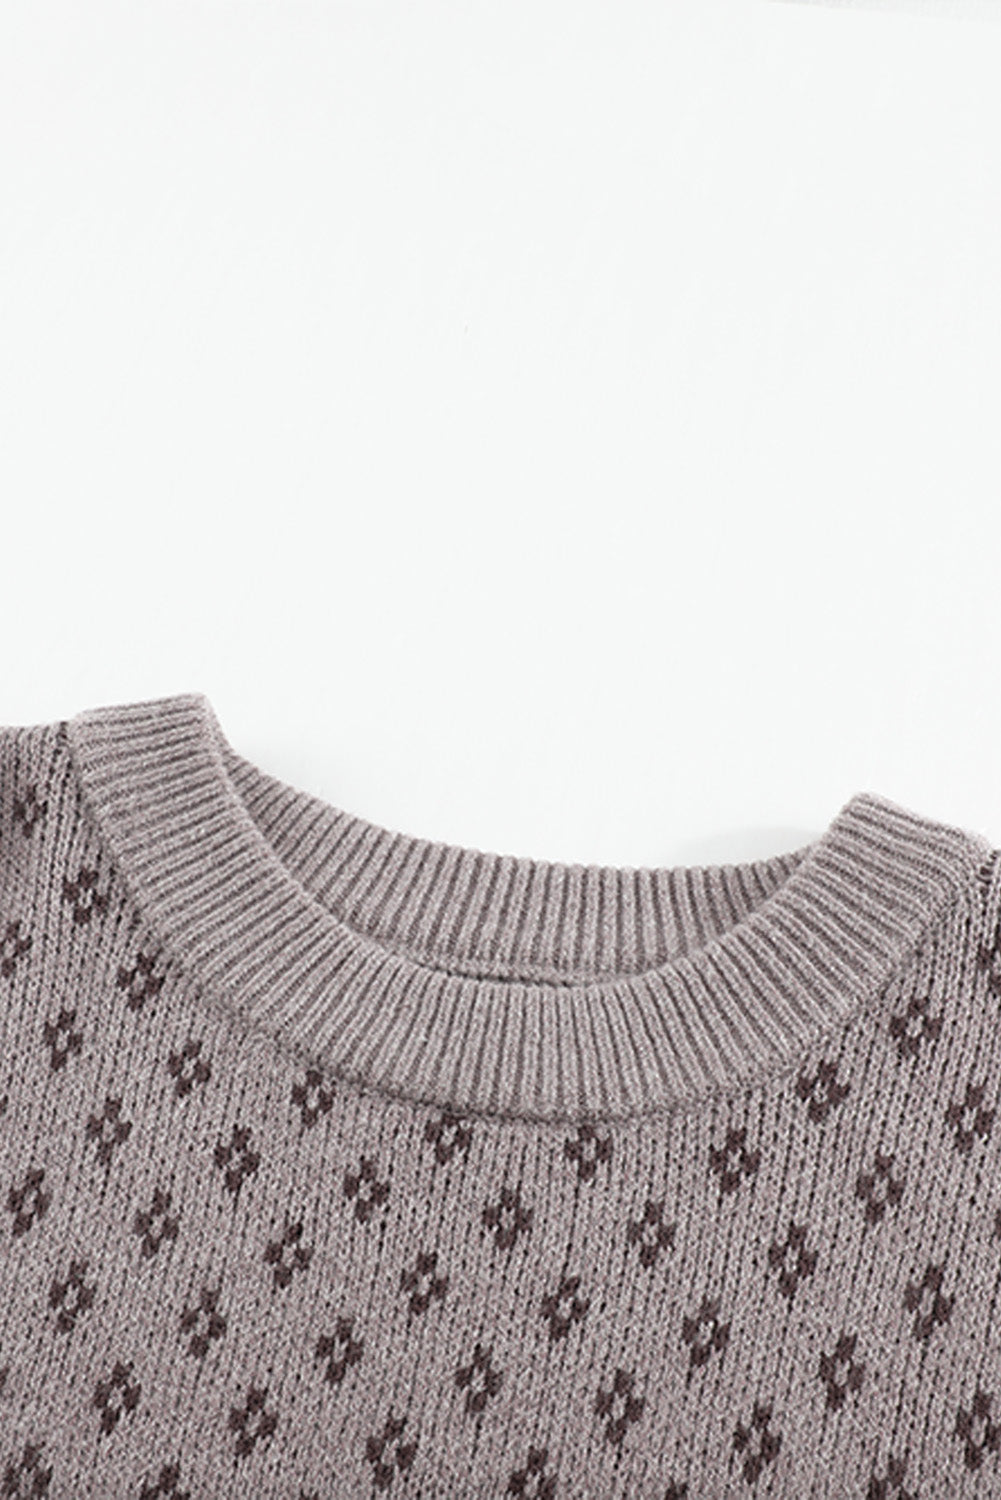 Crew Neck Printed Pullover Sweater